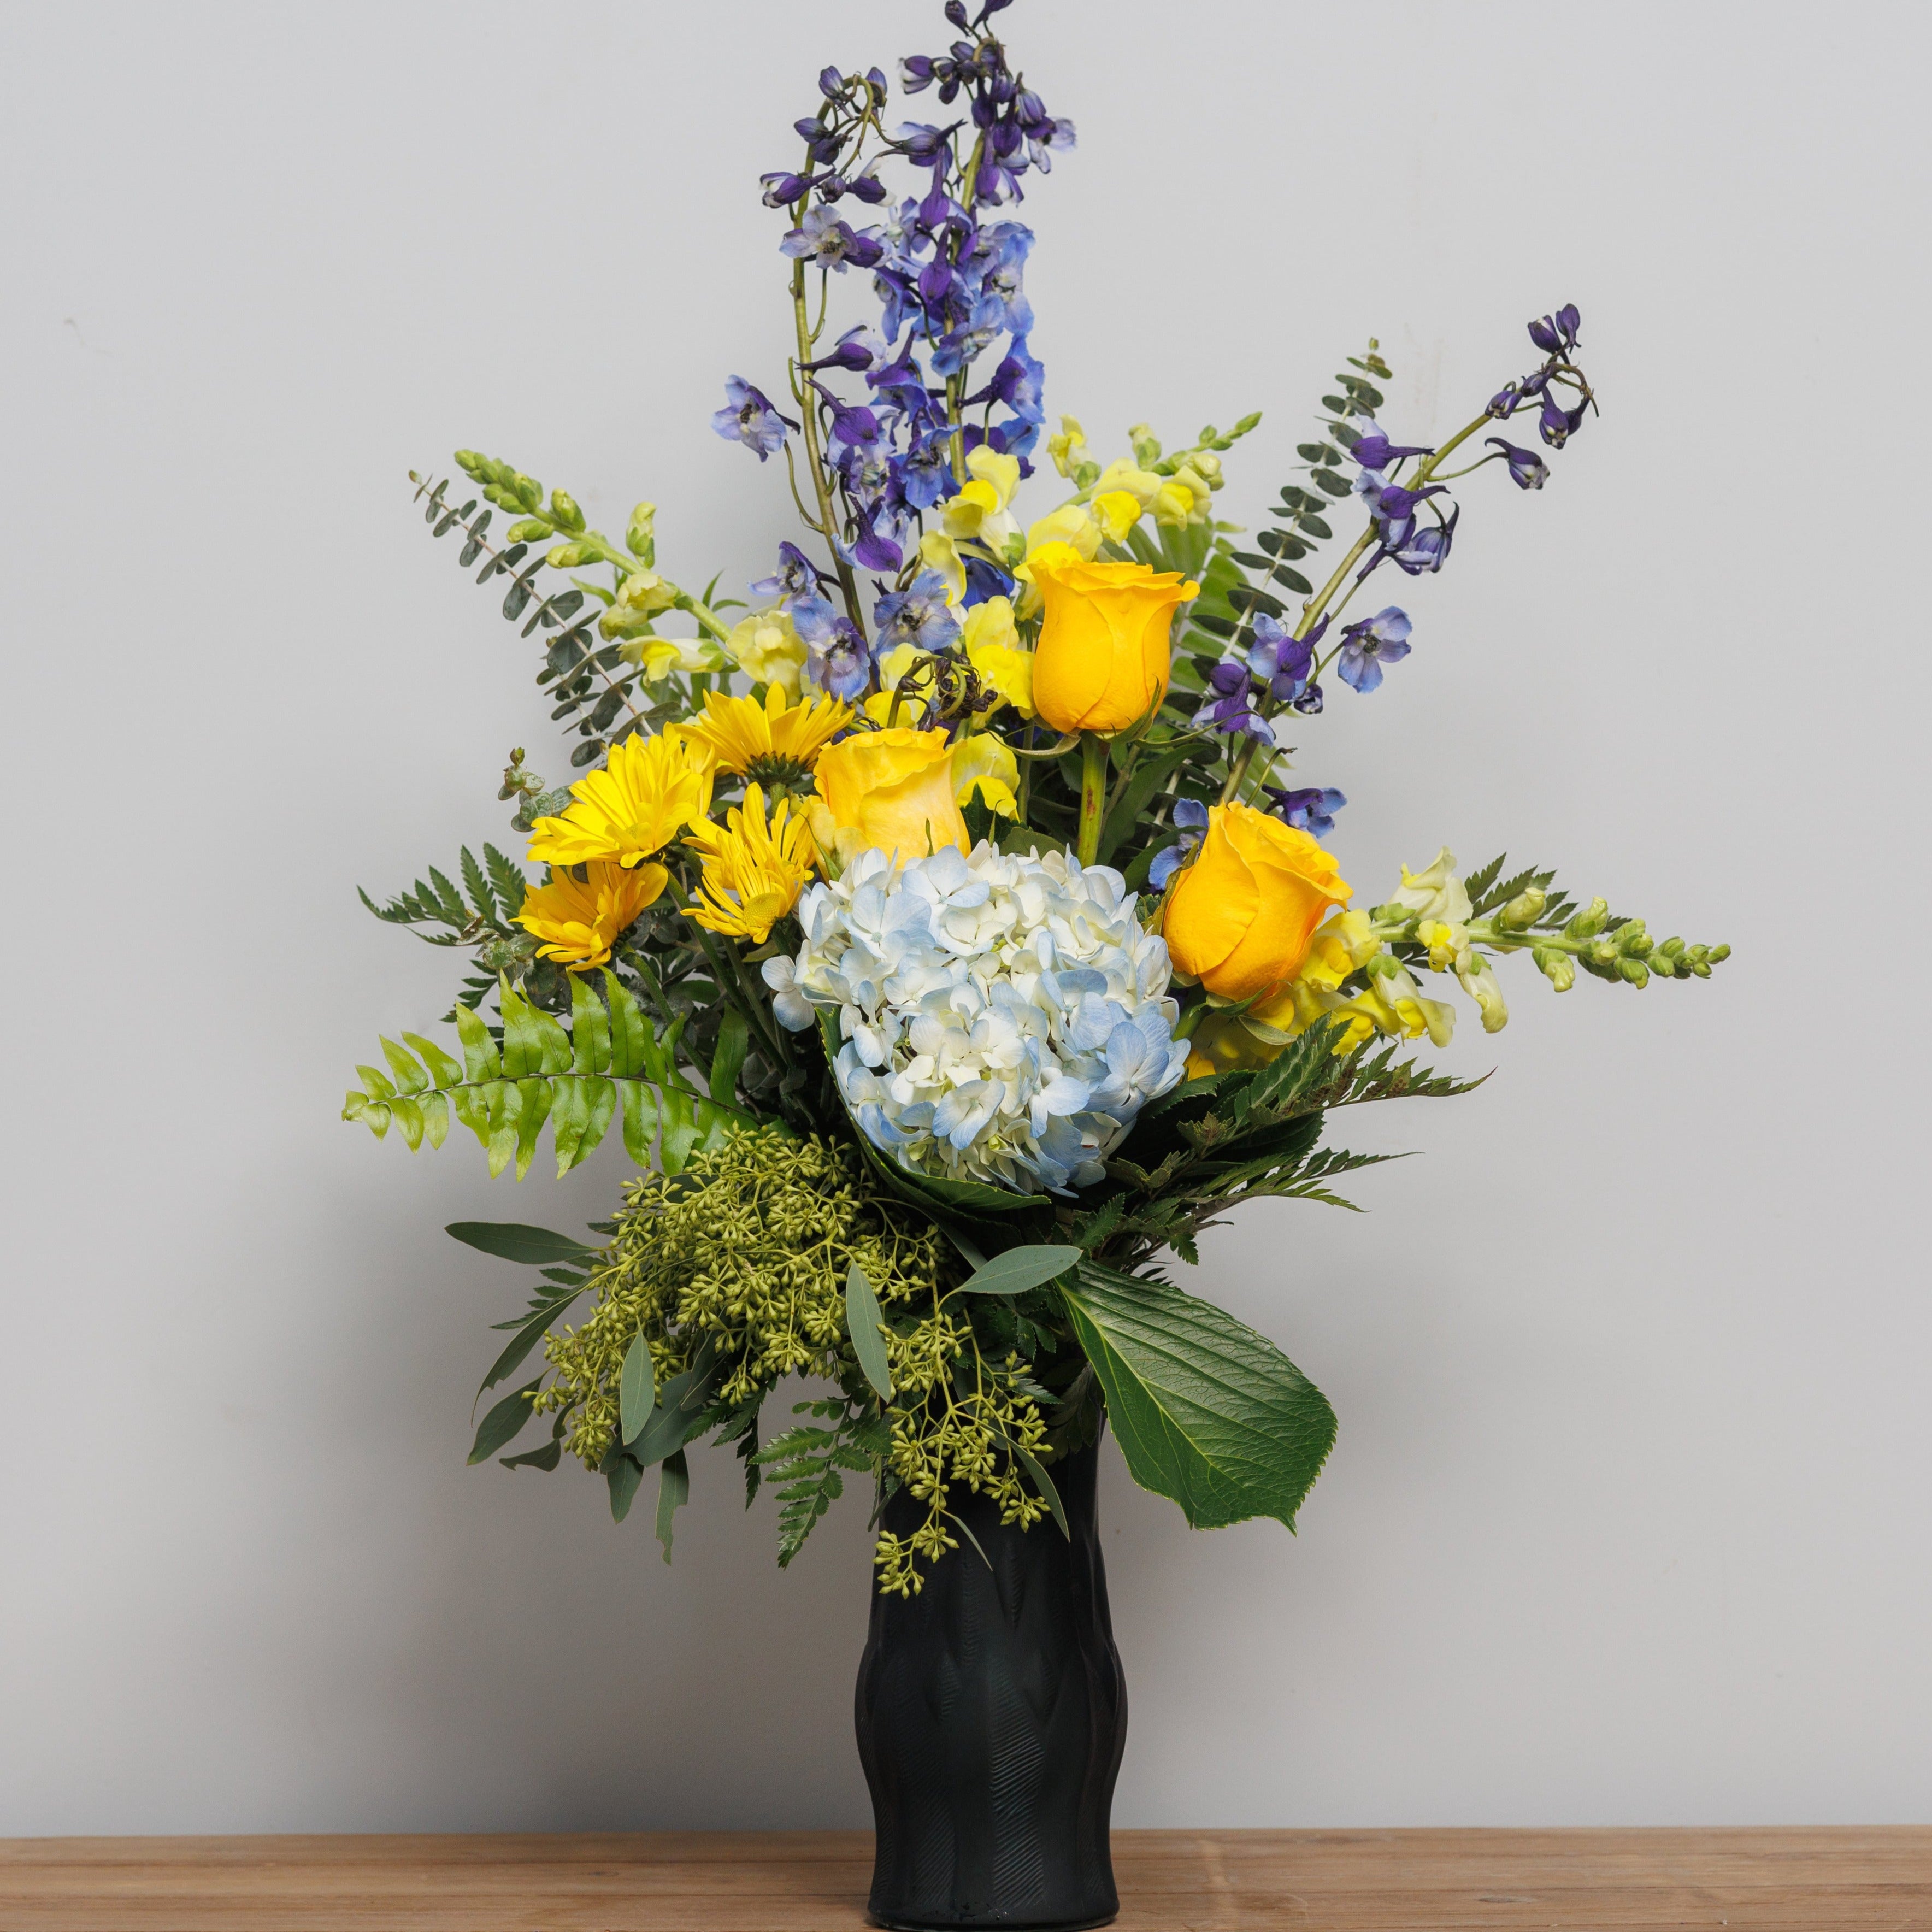 A vase arrangement with yellow roses, blue delphinium and blue hydrangea in a blue vase.